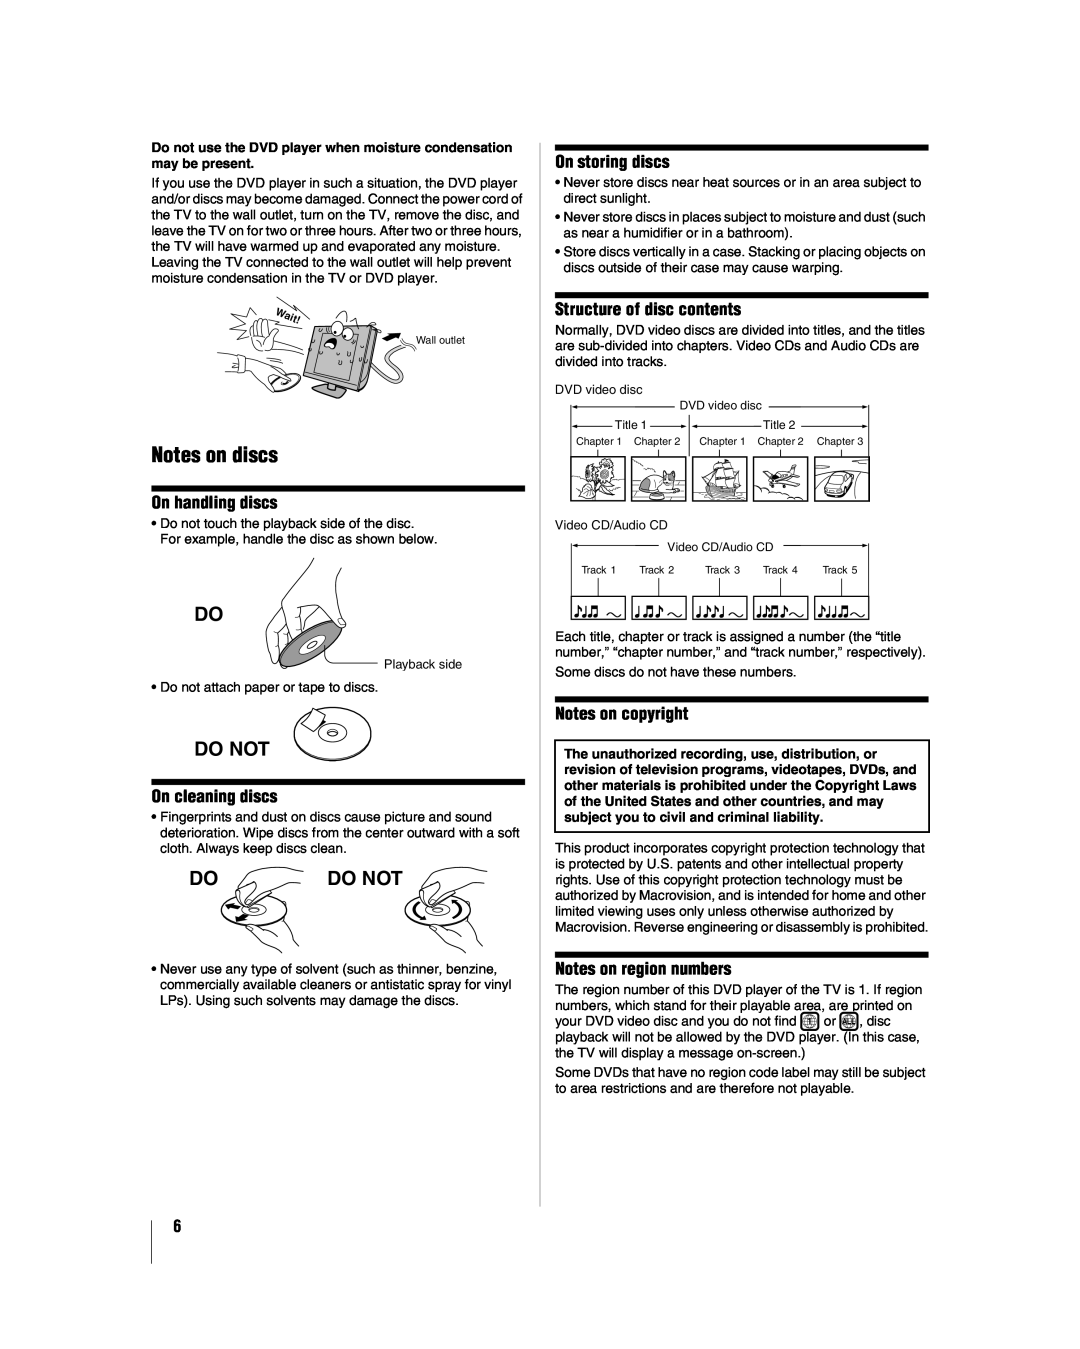 Toshiba 32LV67U Notes on discs, On handling discs, On cleaning discs, On storing discs, Structure of disc contents, Do Not 